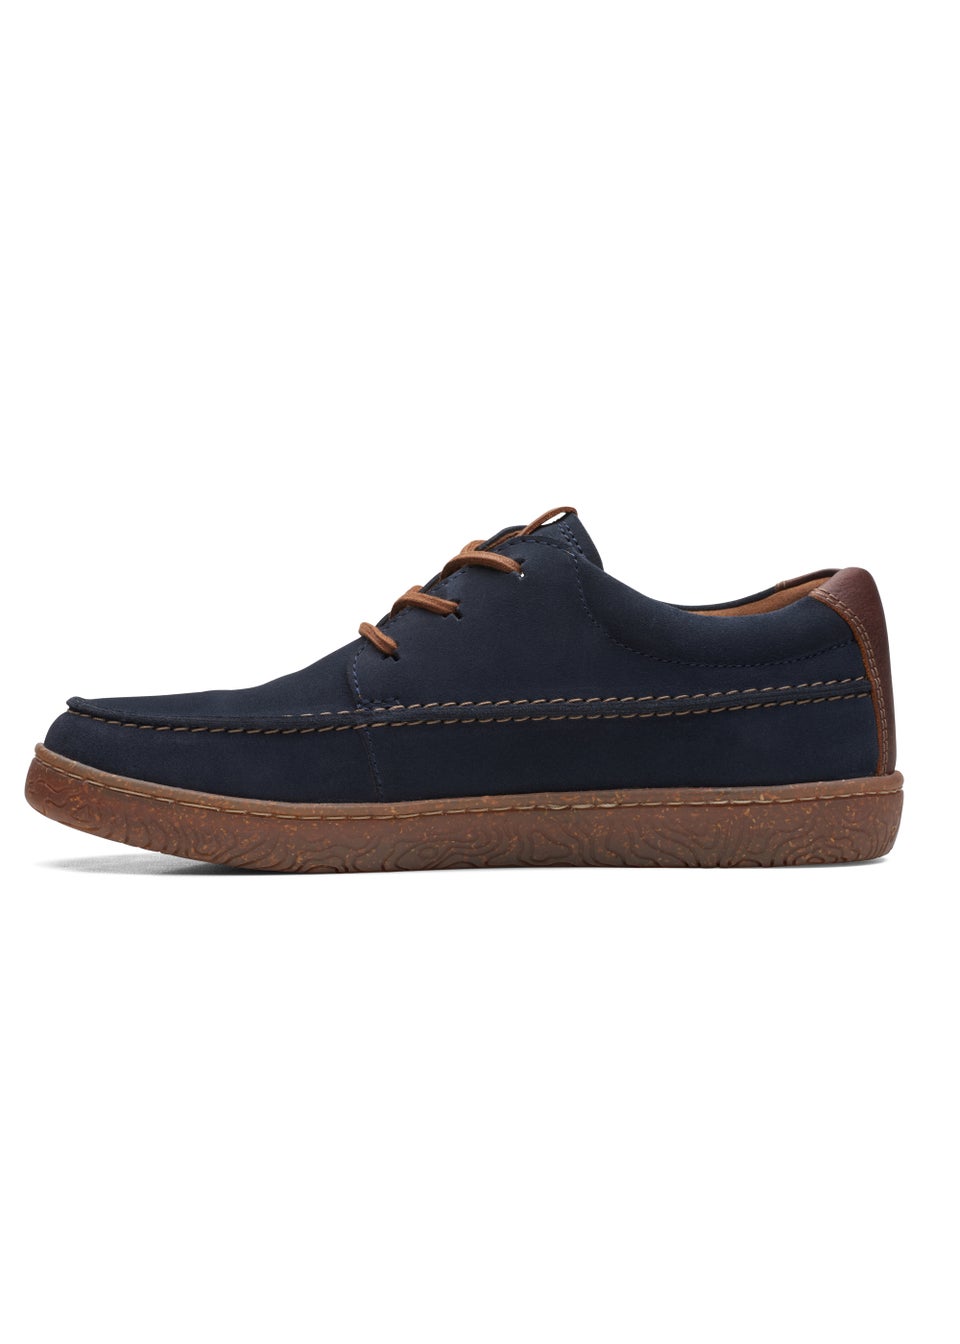 Clarks Navy Hodson Suede Moccasin Shoes - Matalan